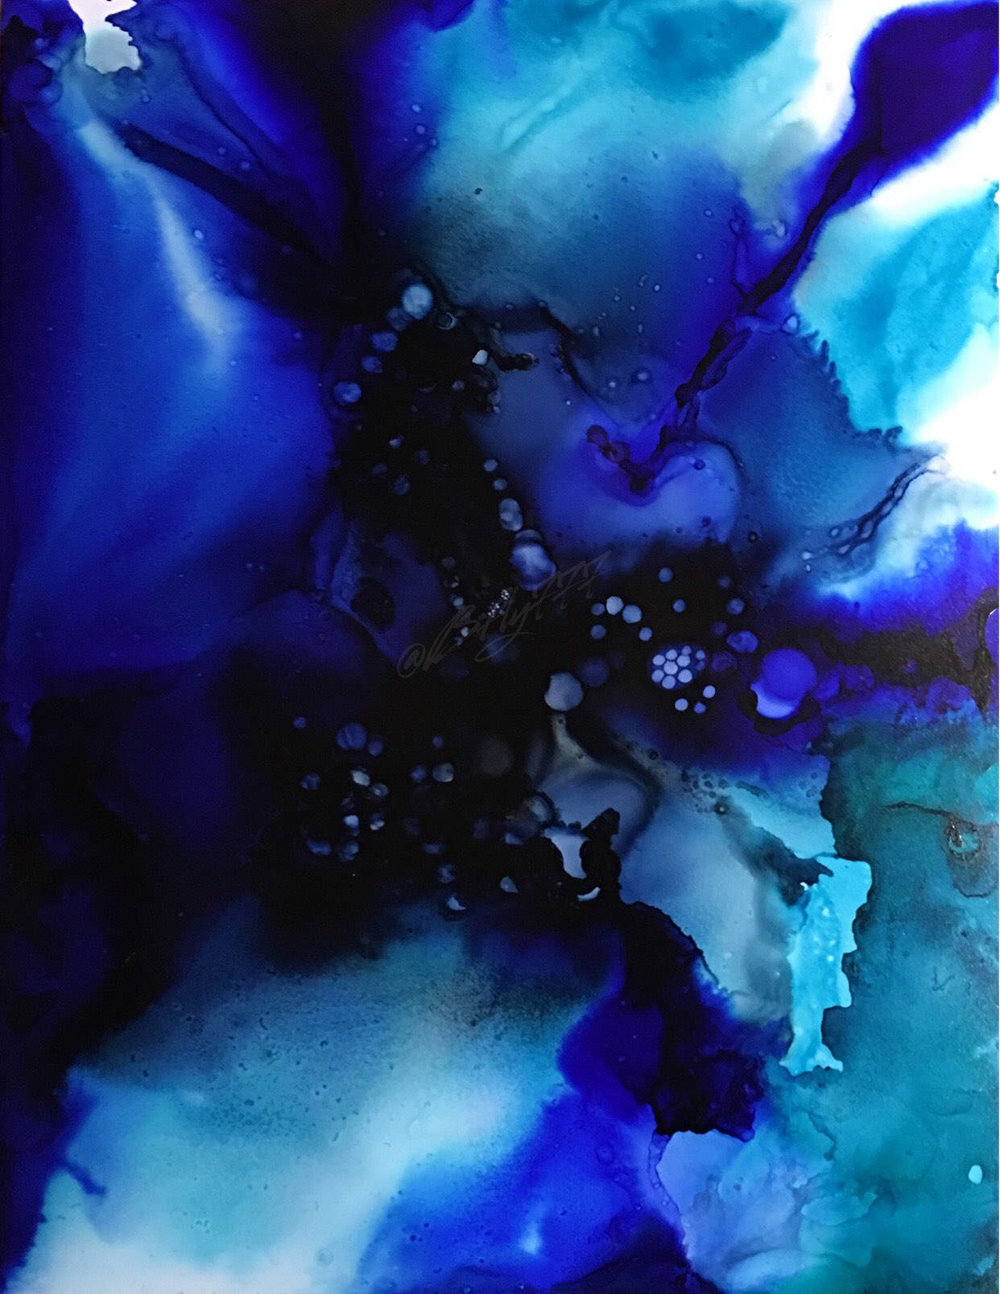 Original Alcohol Ink Abstract Painting | Underwater | 9x12